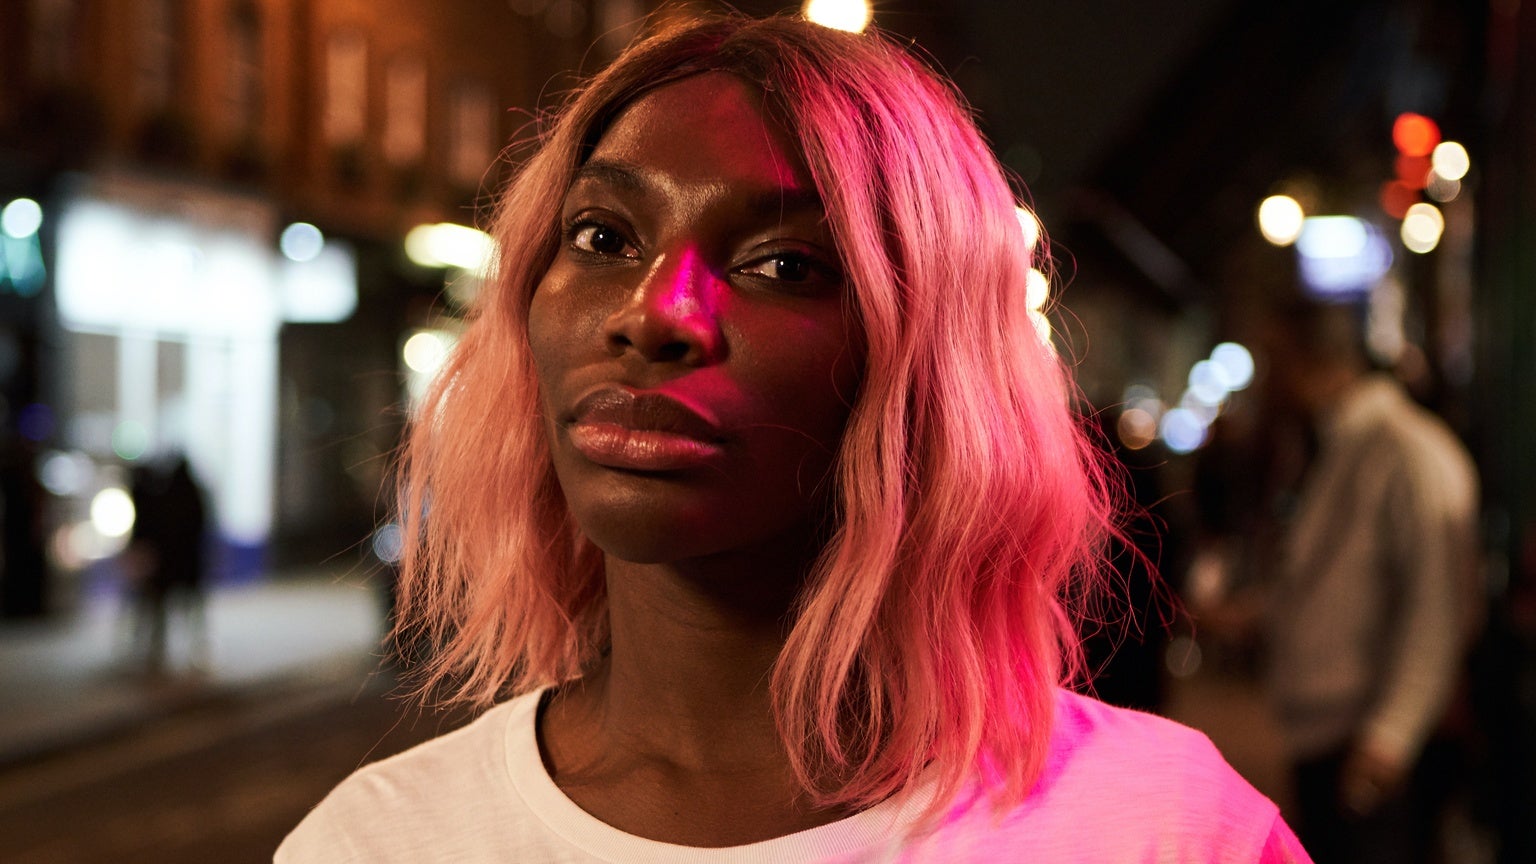 Michaela Coel Creates And Stars In Her Sexual Assault Inspired Series ‘I May Destroy You’